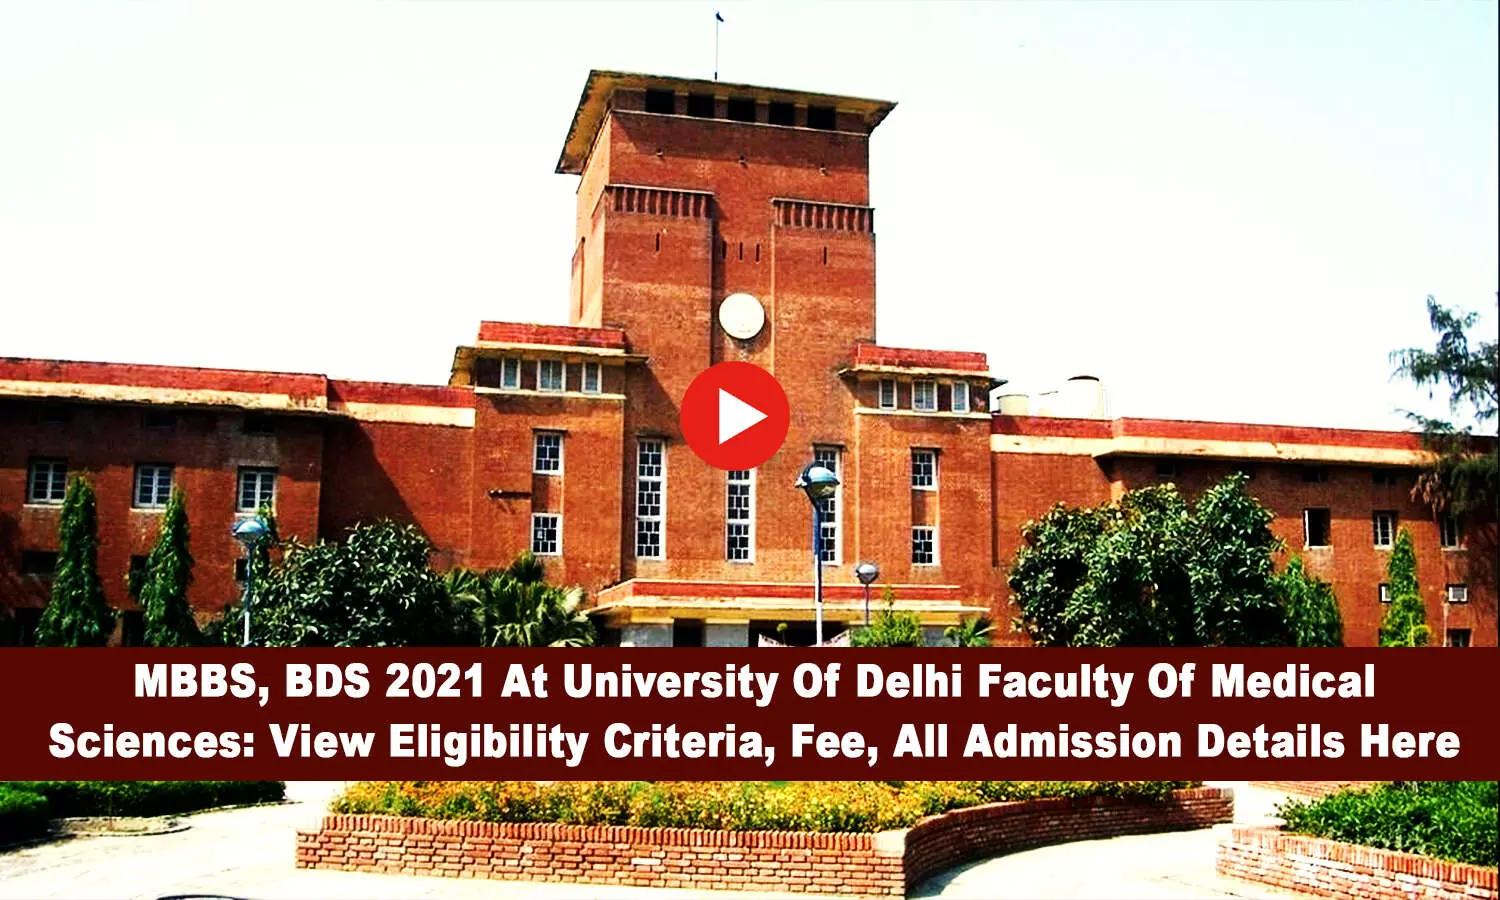 Delhi University Faculty of Medical Sciences invites applications for MBBS, BDS admissions, Details